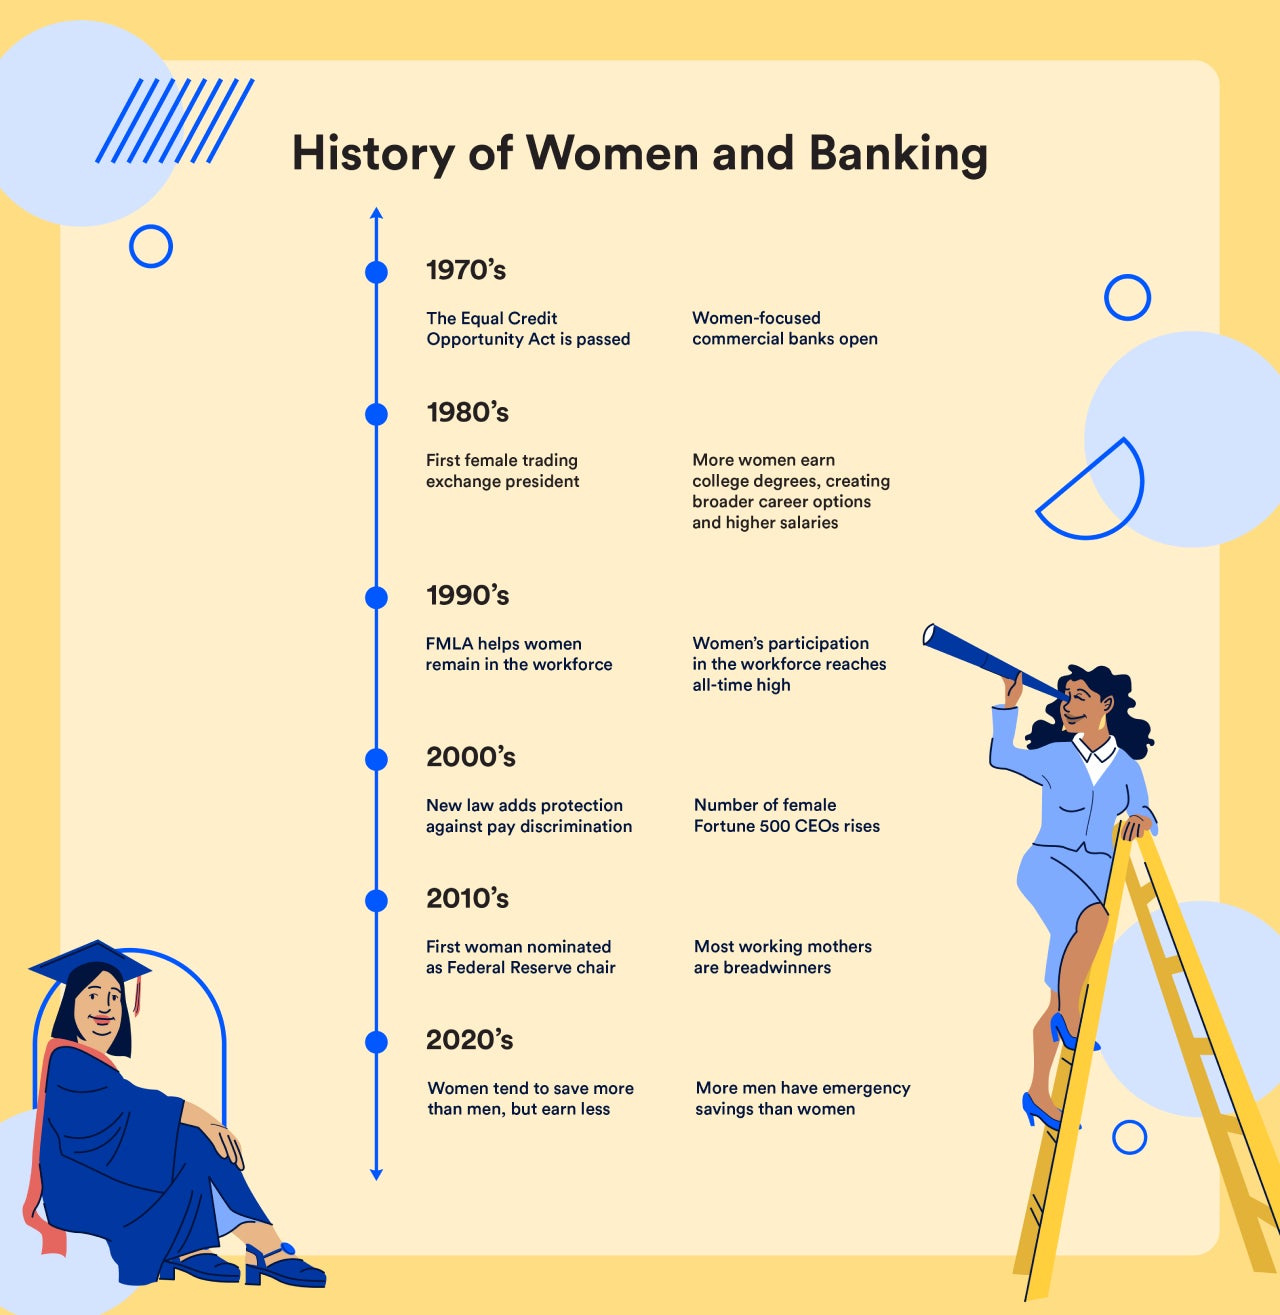 visual timeline of history of women and banking